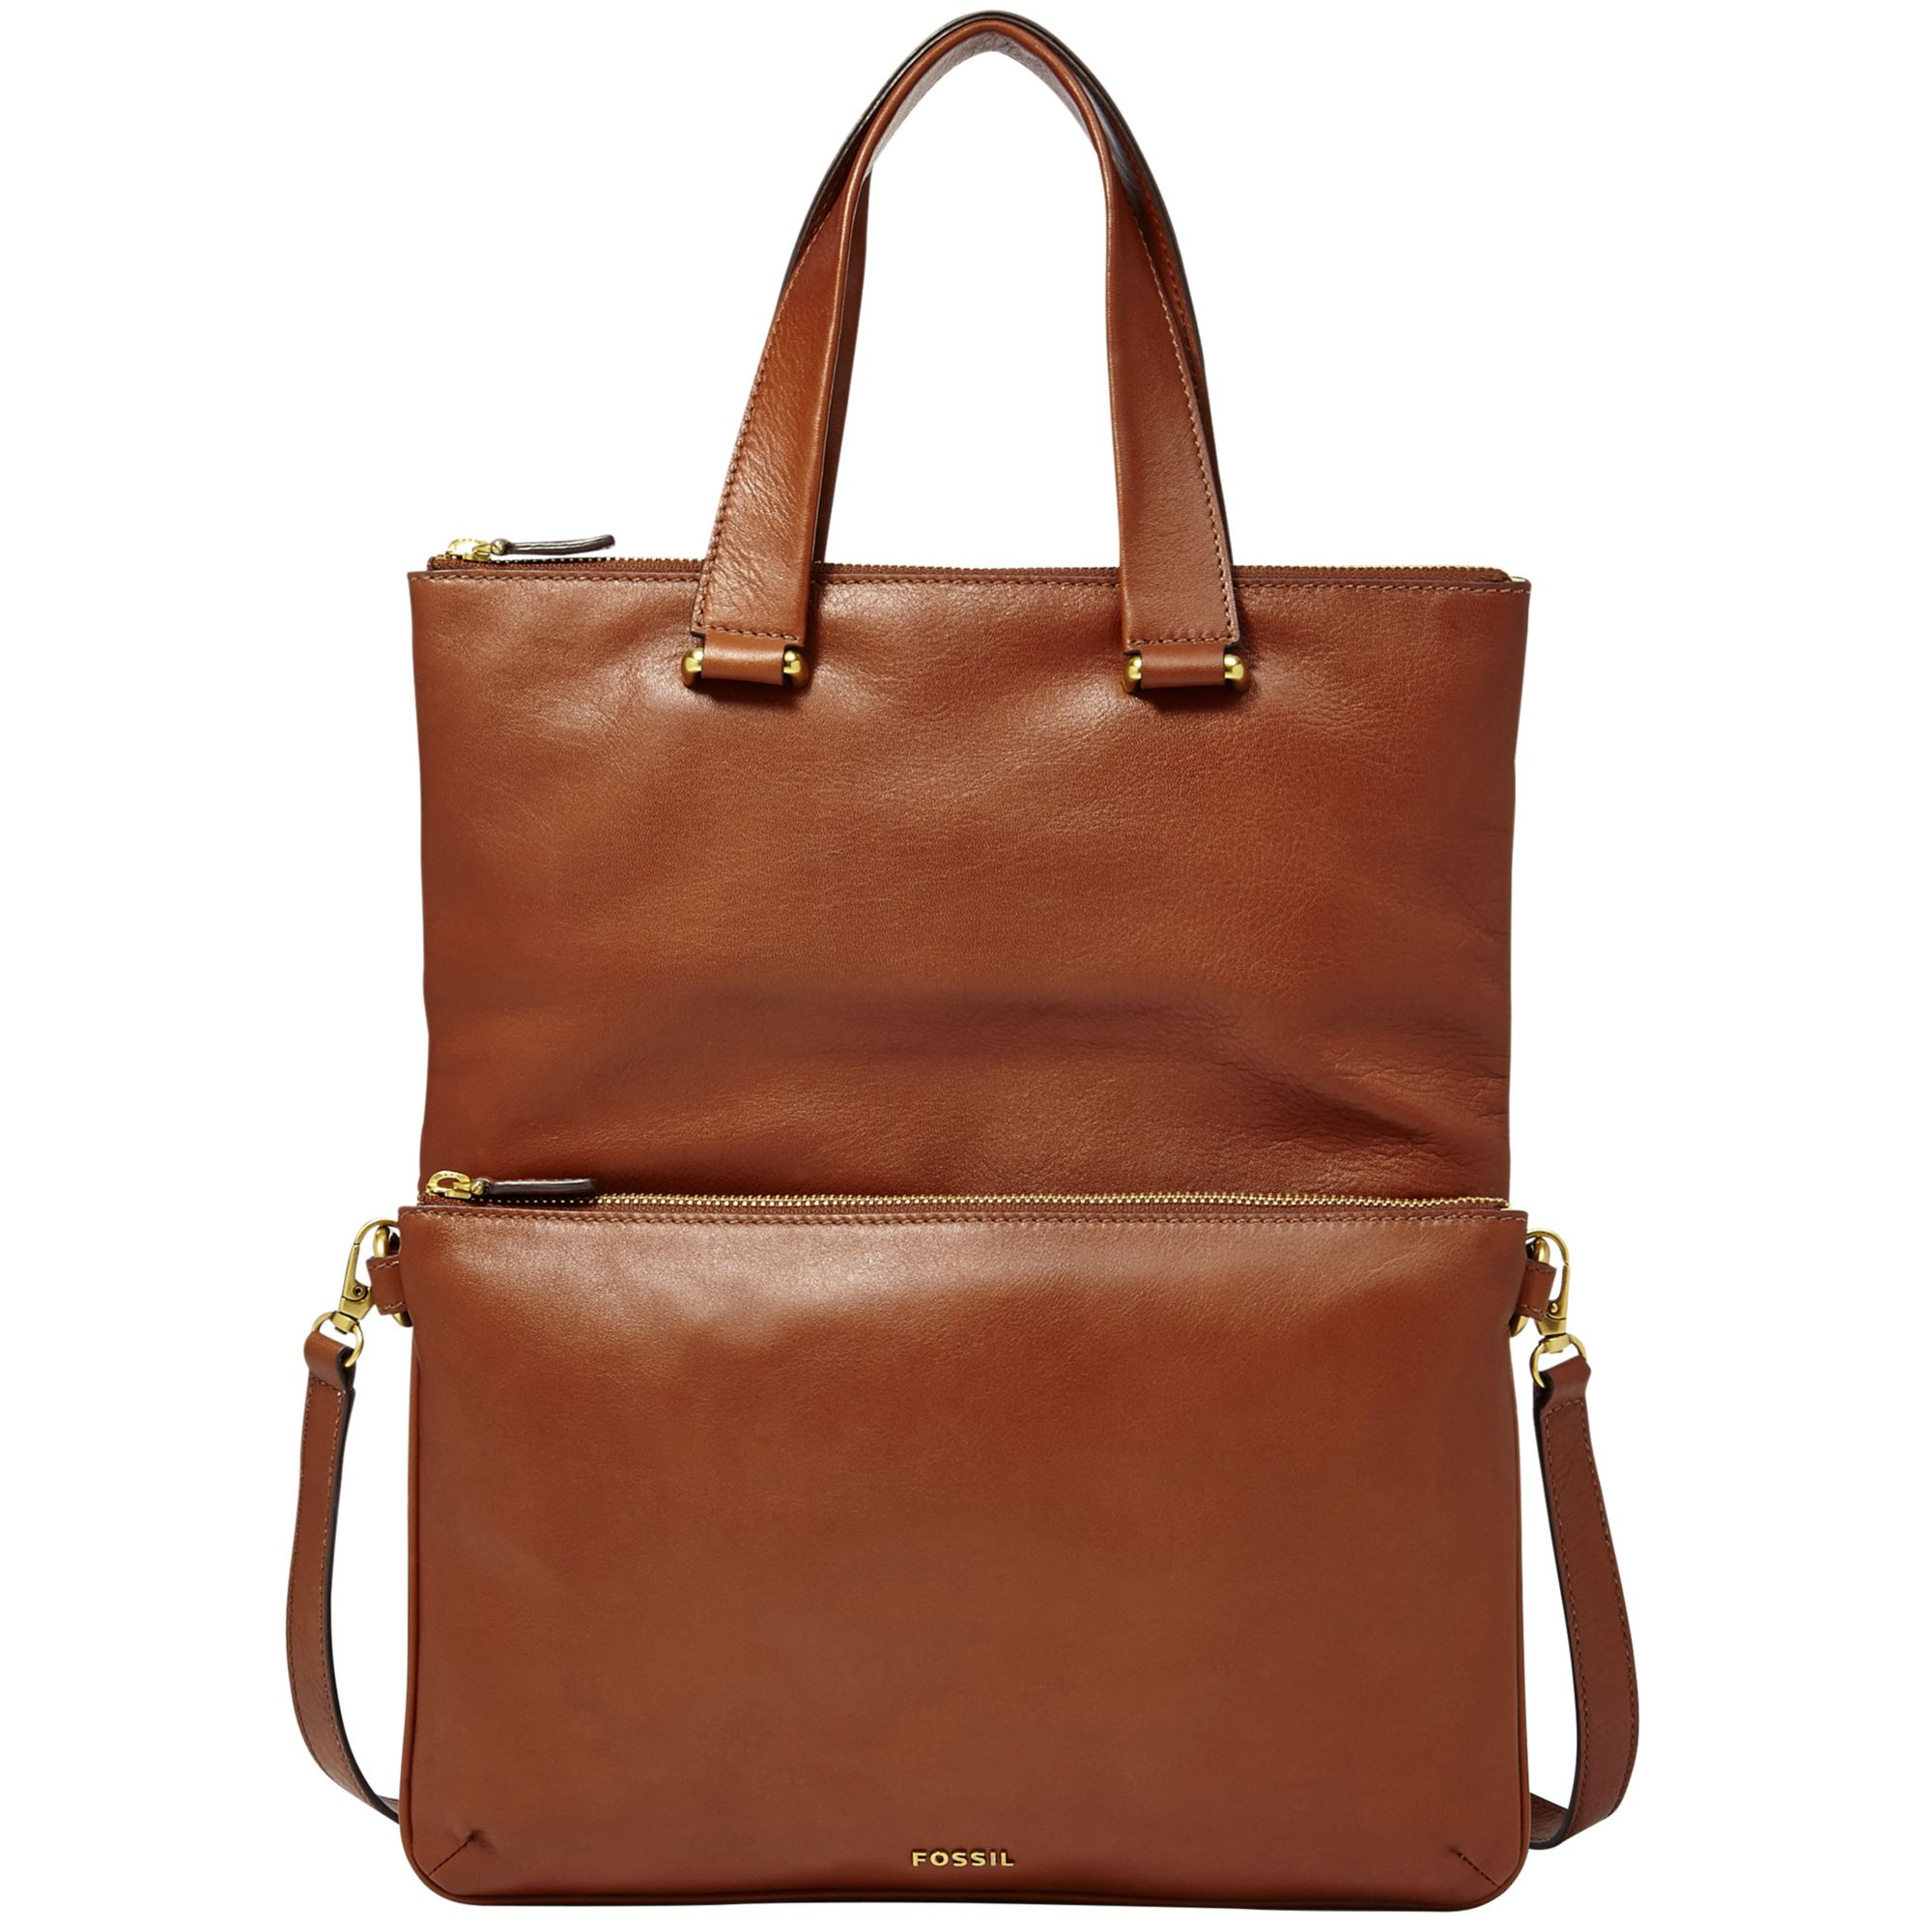 Fossil Memoir Leather Foldover Tote in Brown | Lyst